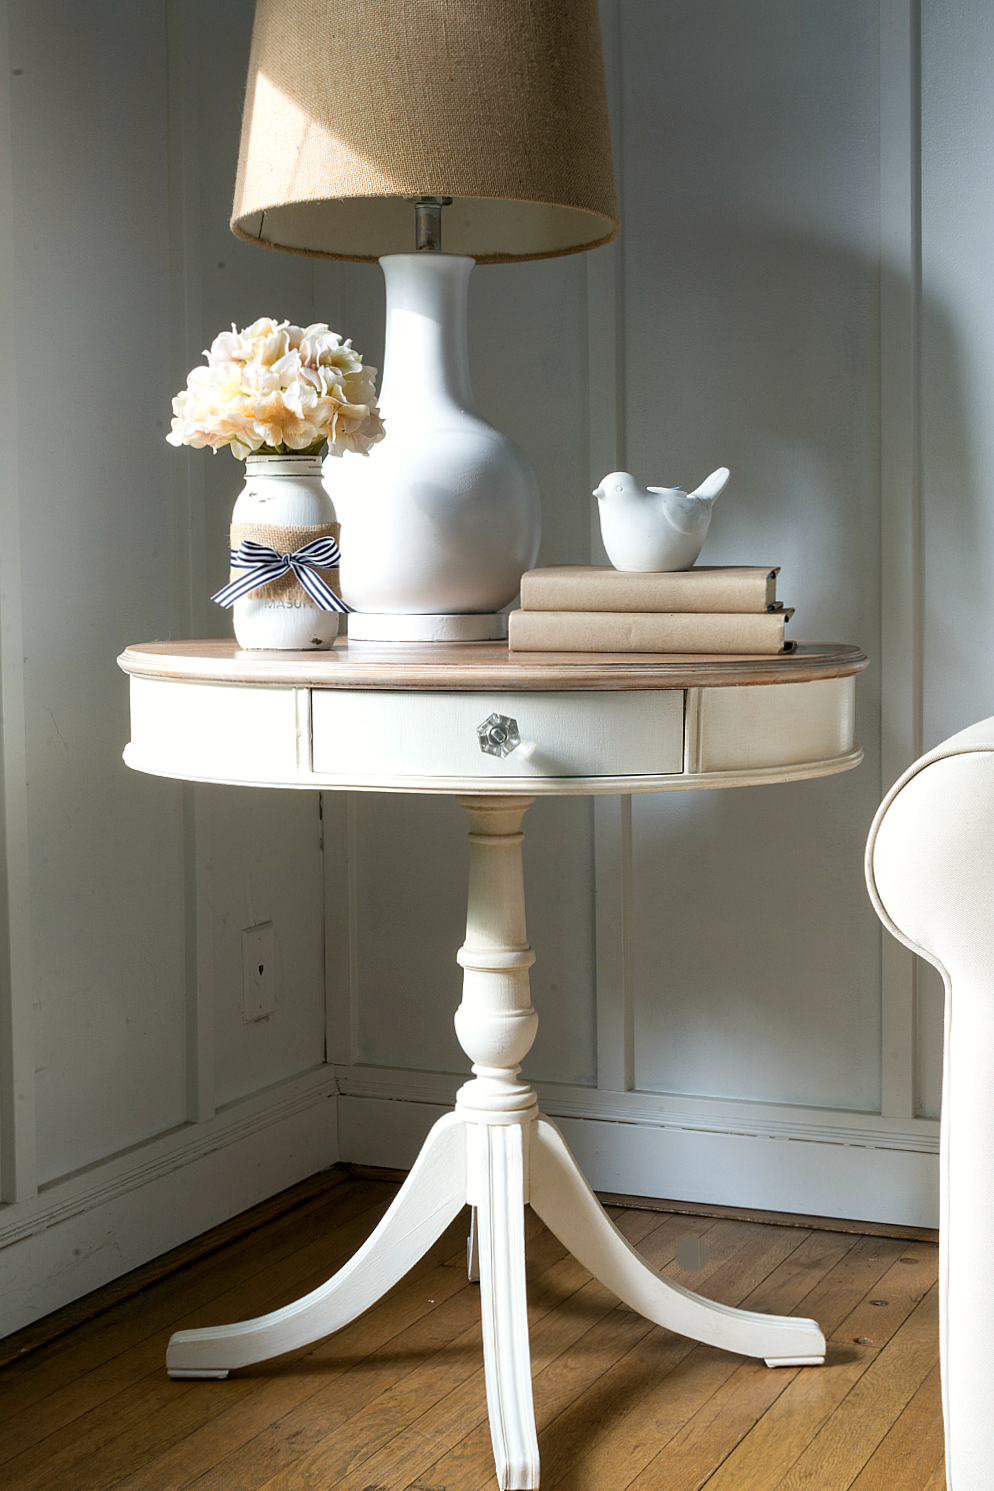 drum-table-painted-white-whitewashed-top-how-to (15 of 29) 2